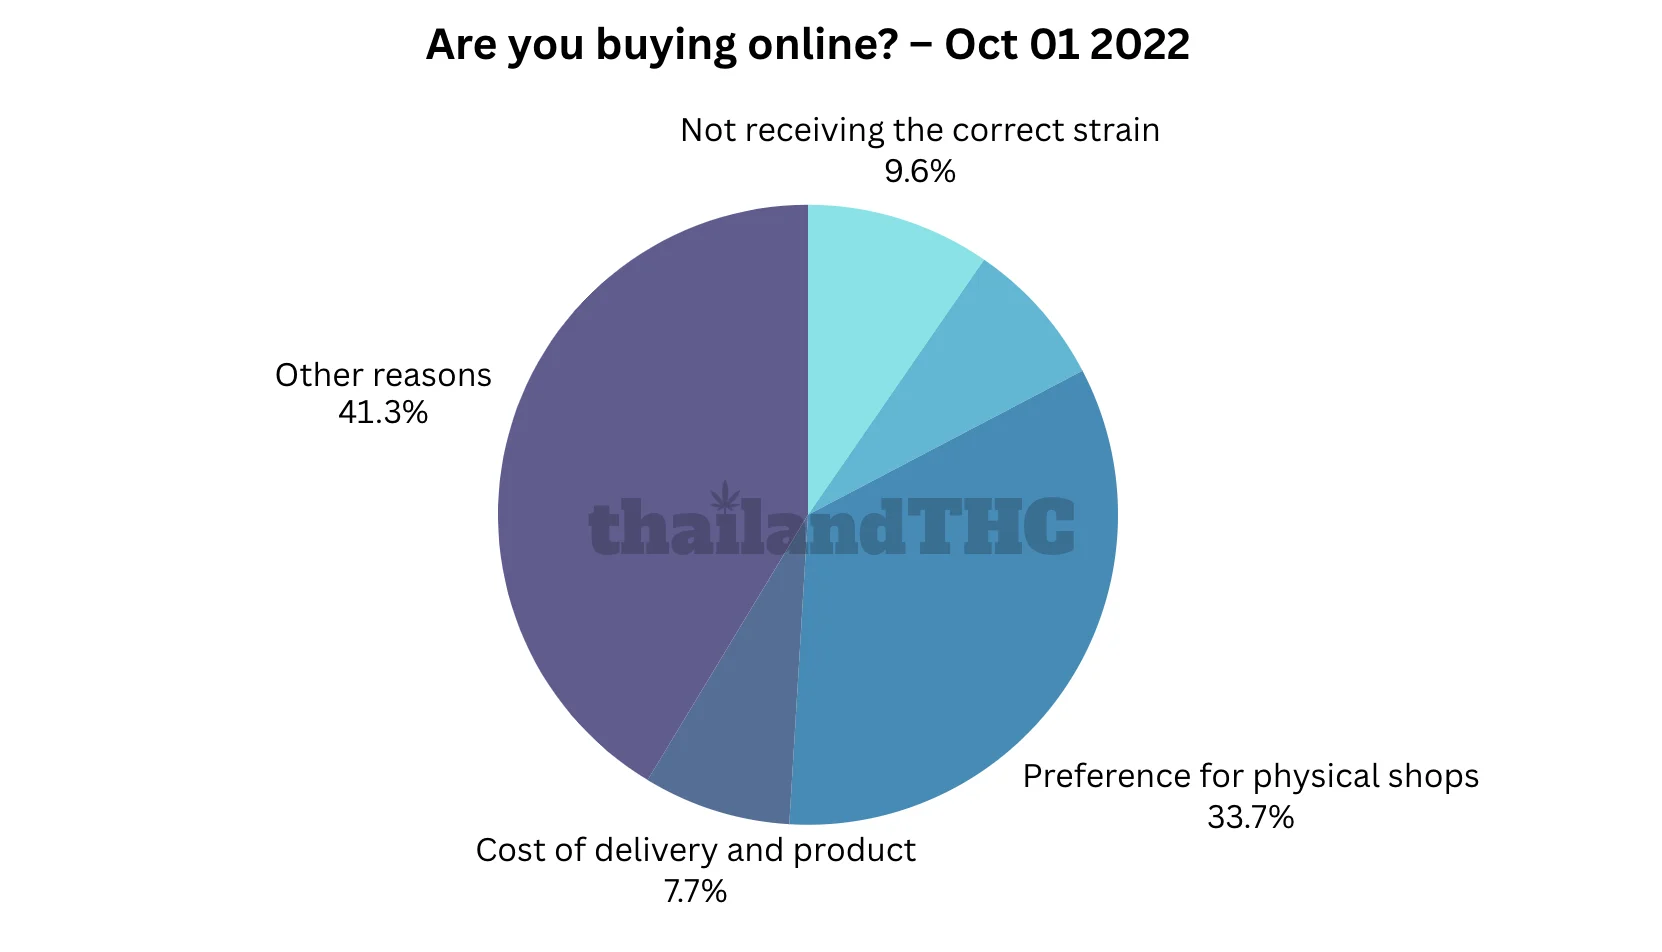 Are you buying online?